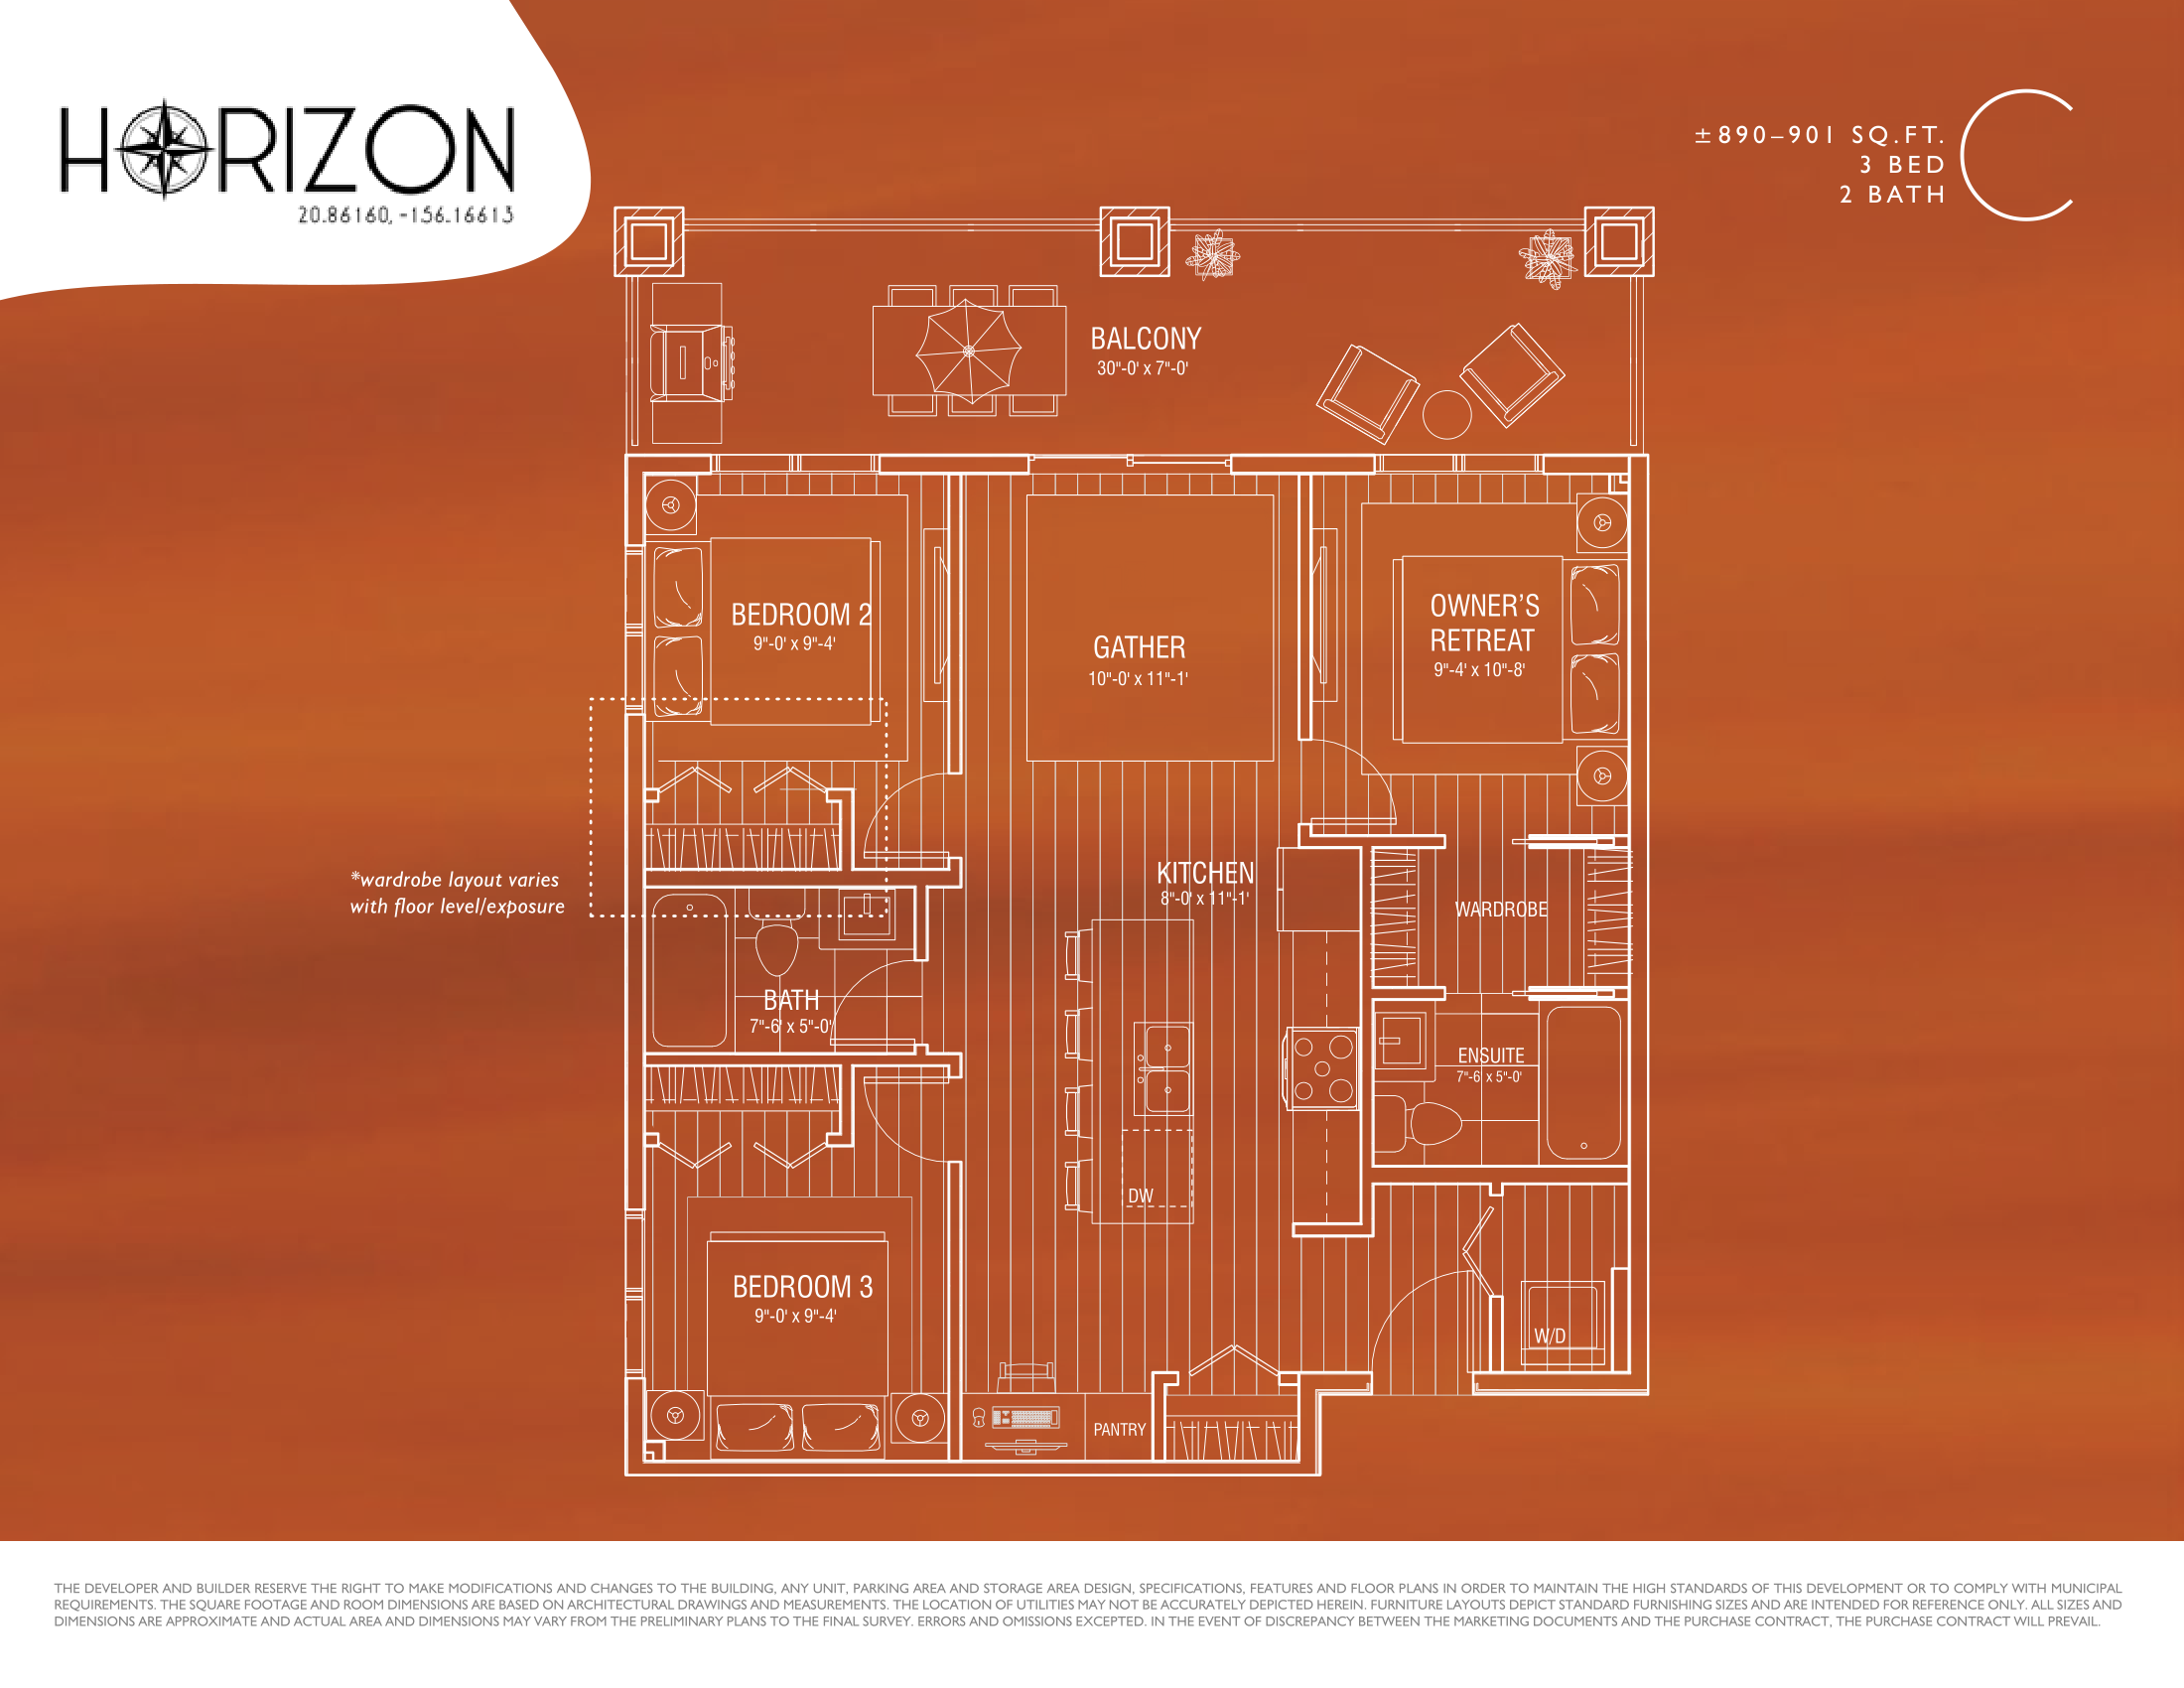  Floor Plan of Horizon Condos with undefined beds